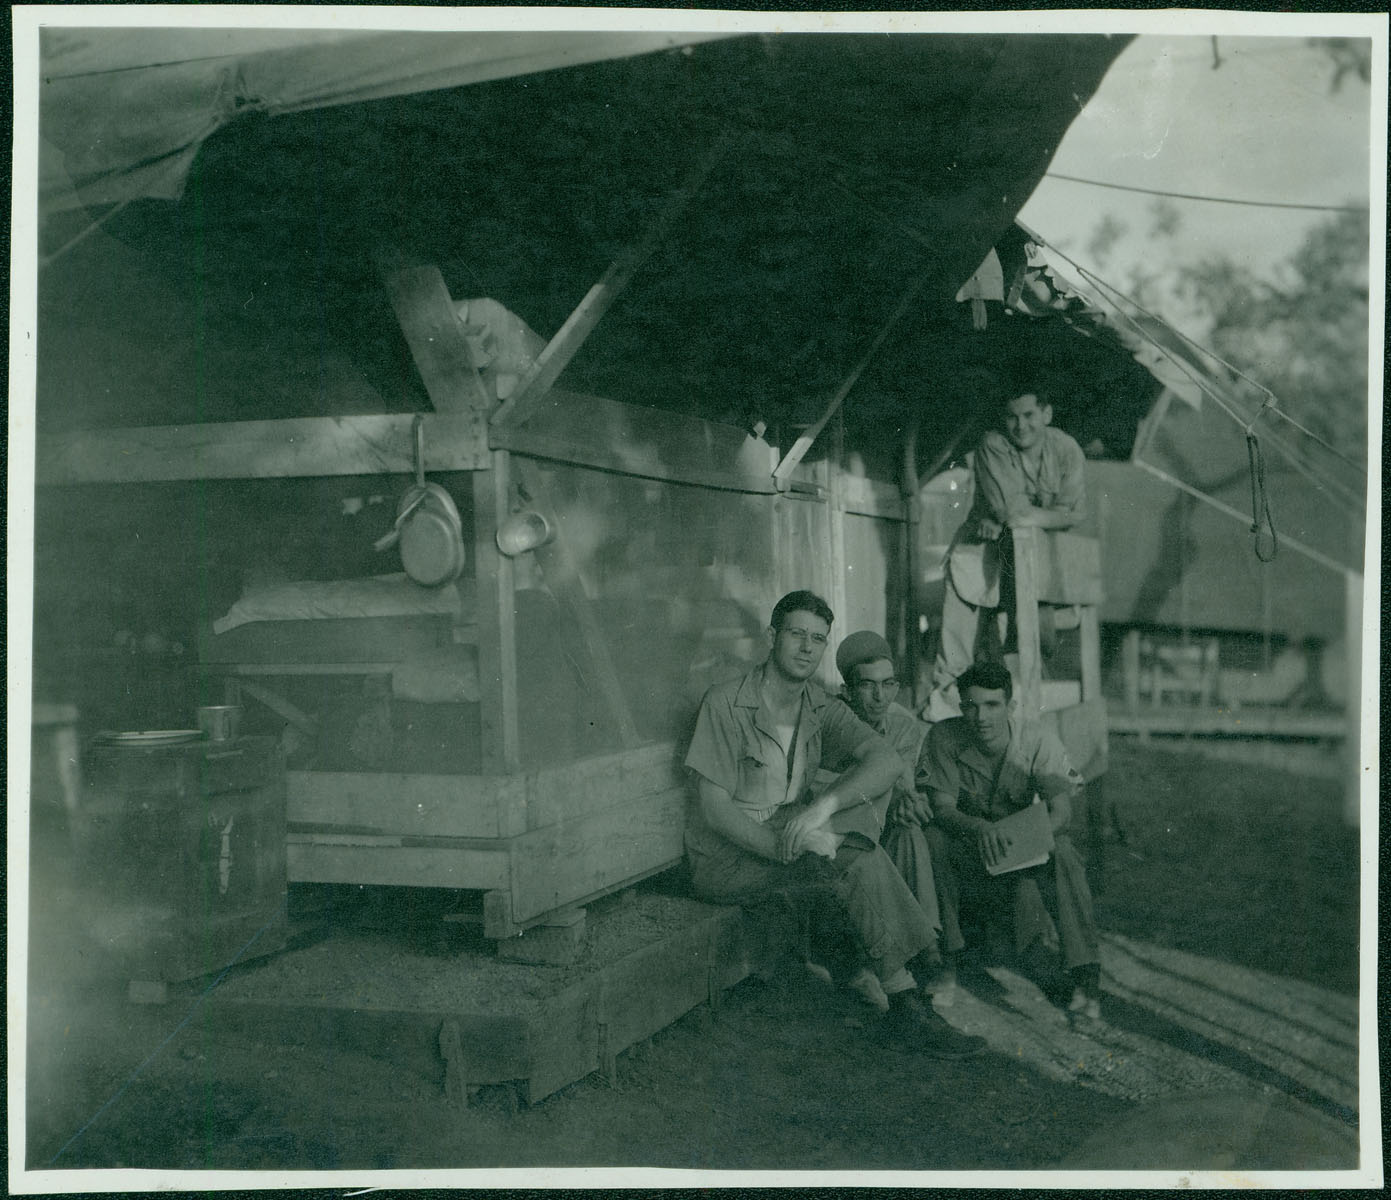 Merchant and friends outside living quarters [RG5841-9-8]